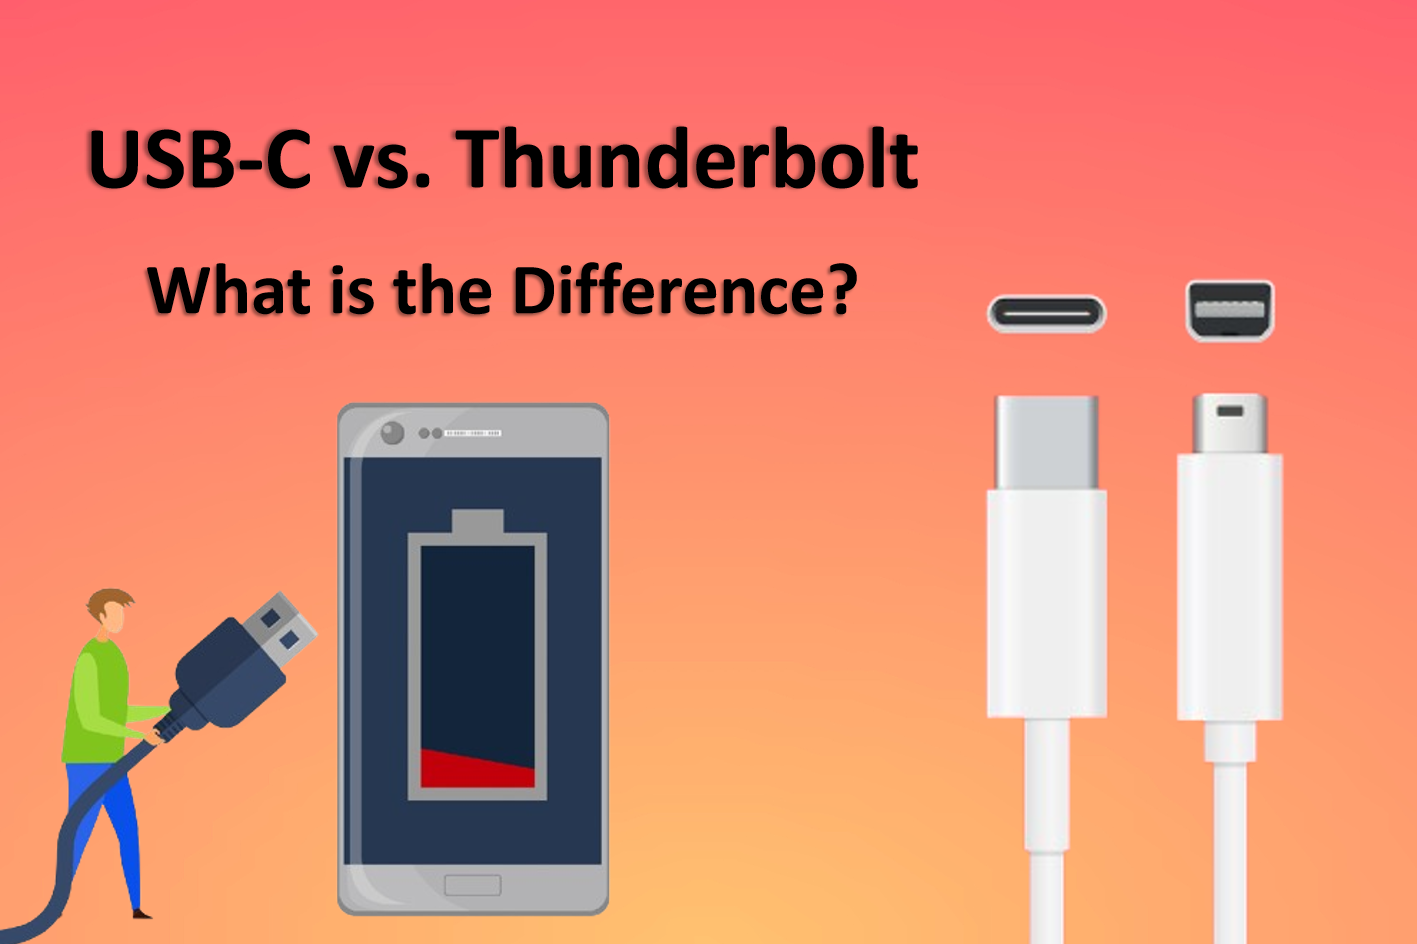 USB-C vs. Thunderbolt: What is the Difference?